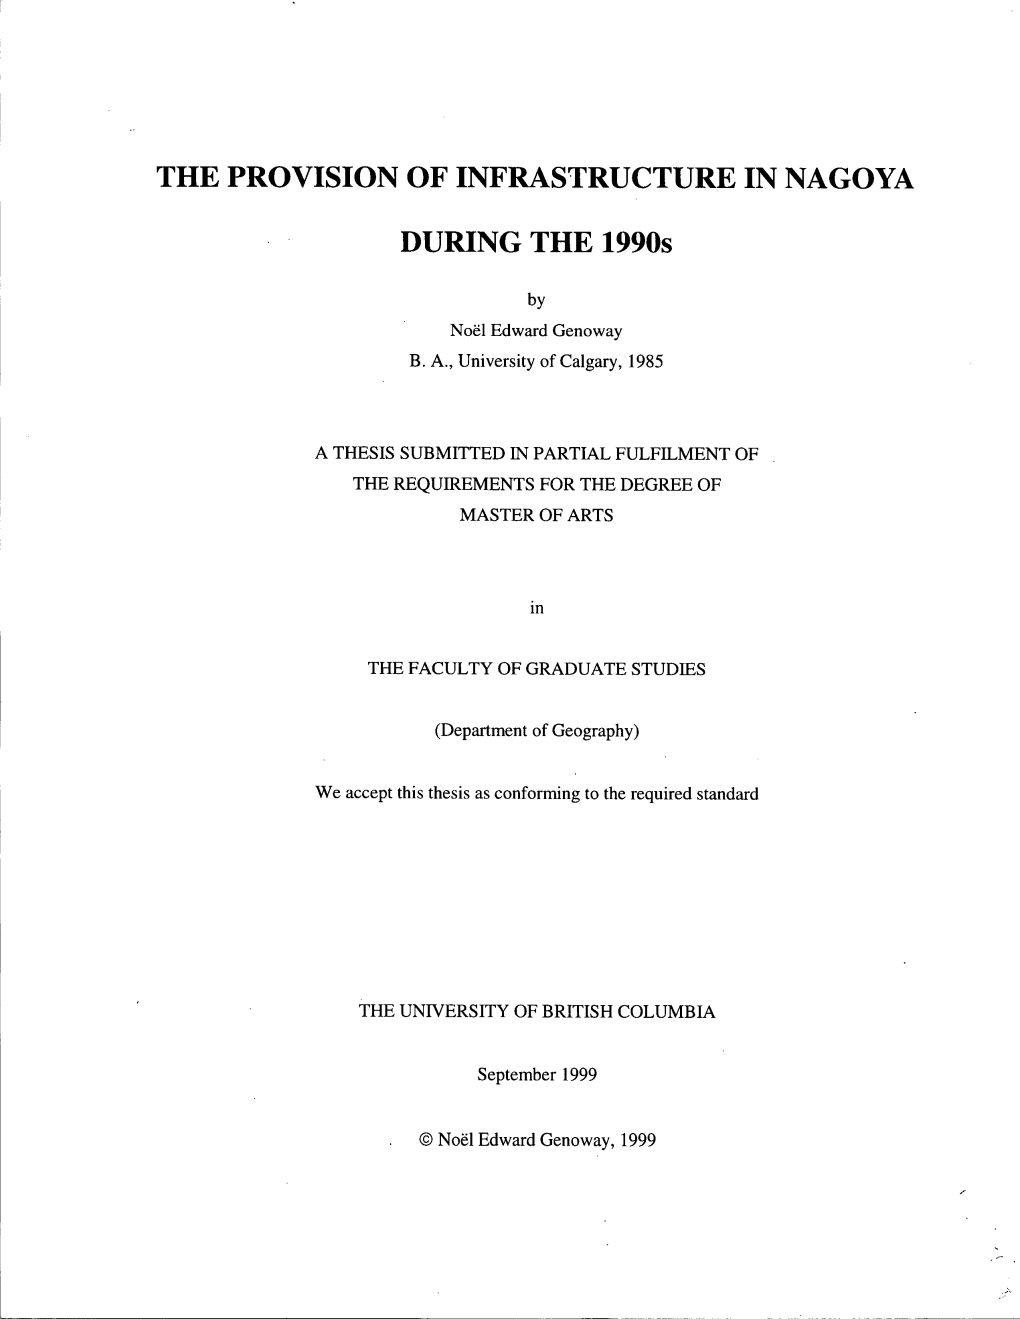 The Provision of Infrastructure in Nagoya